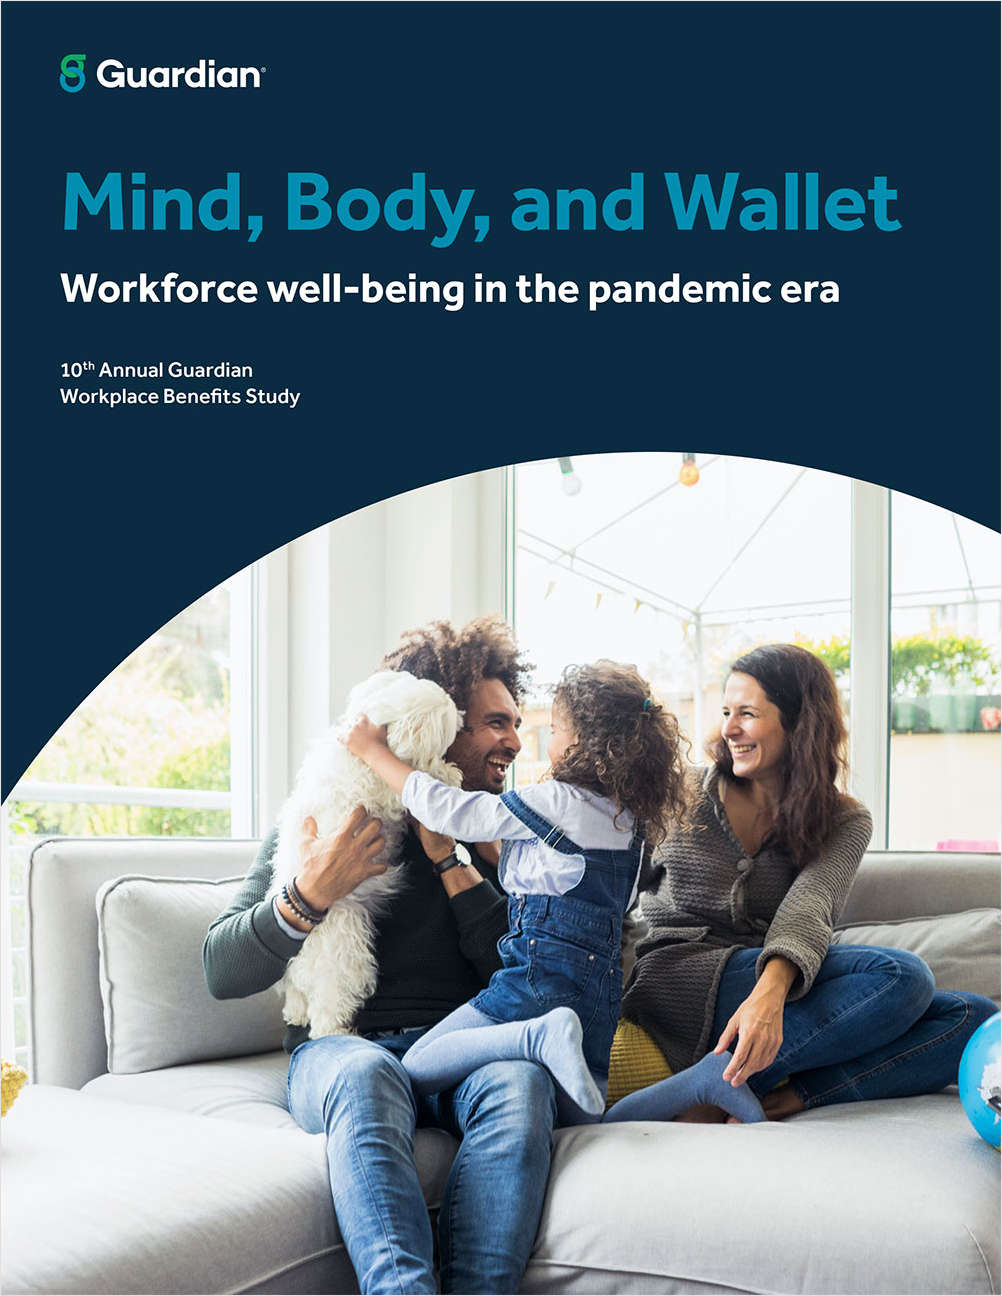 Mind, Body and Wallet: Workforce Well-Being in the Pandemic Era